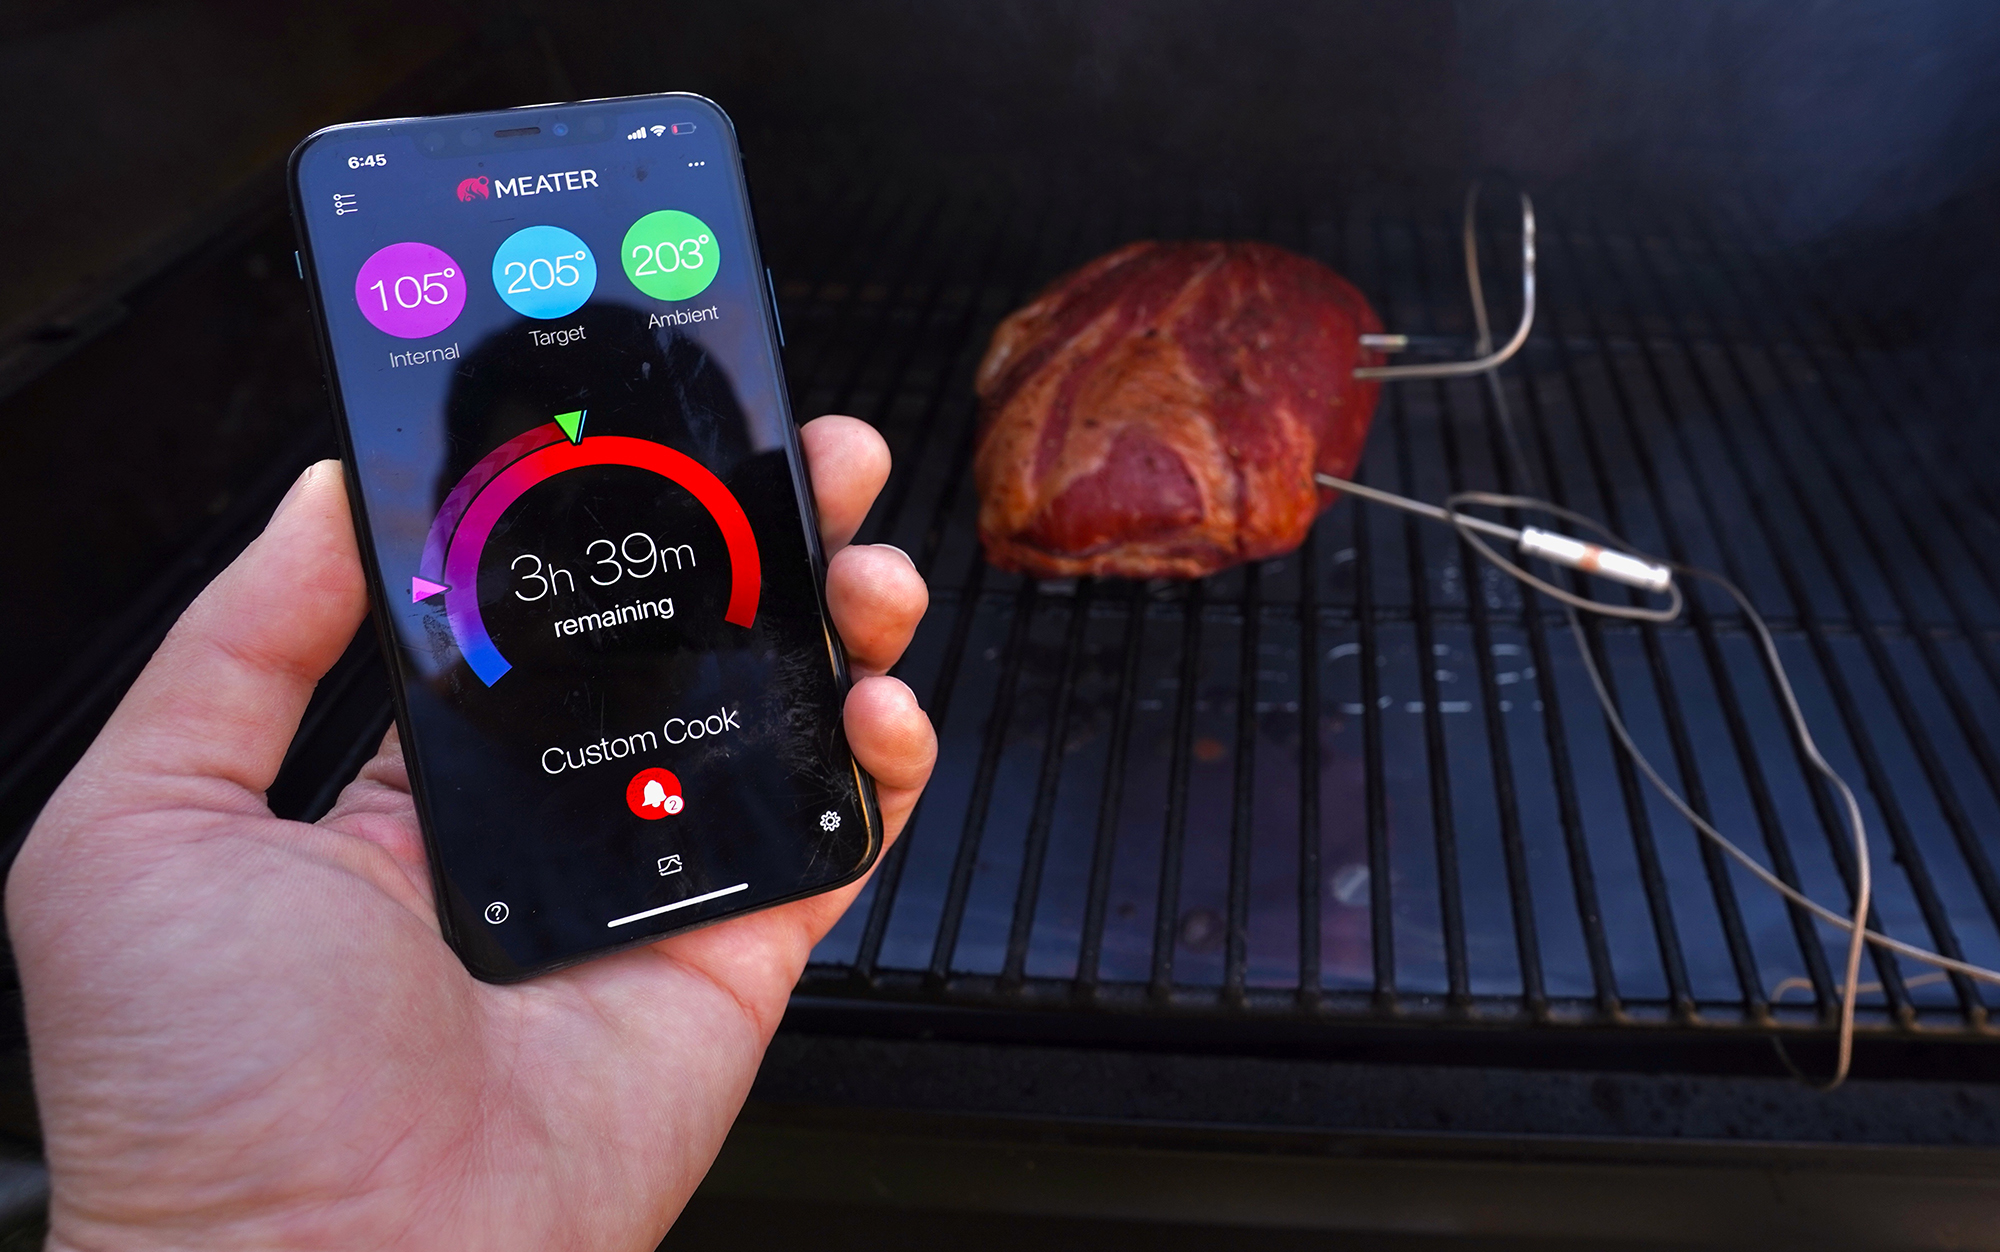 The Meater wireless meat thermometer takes both the ambient and internal temperatures.